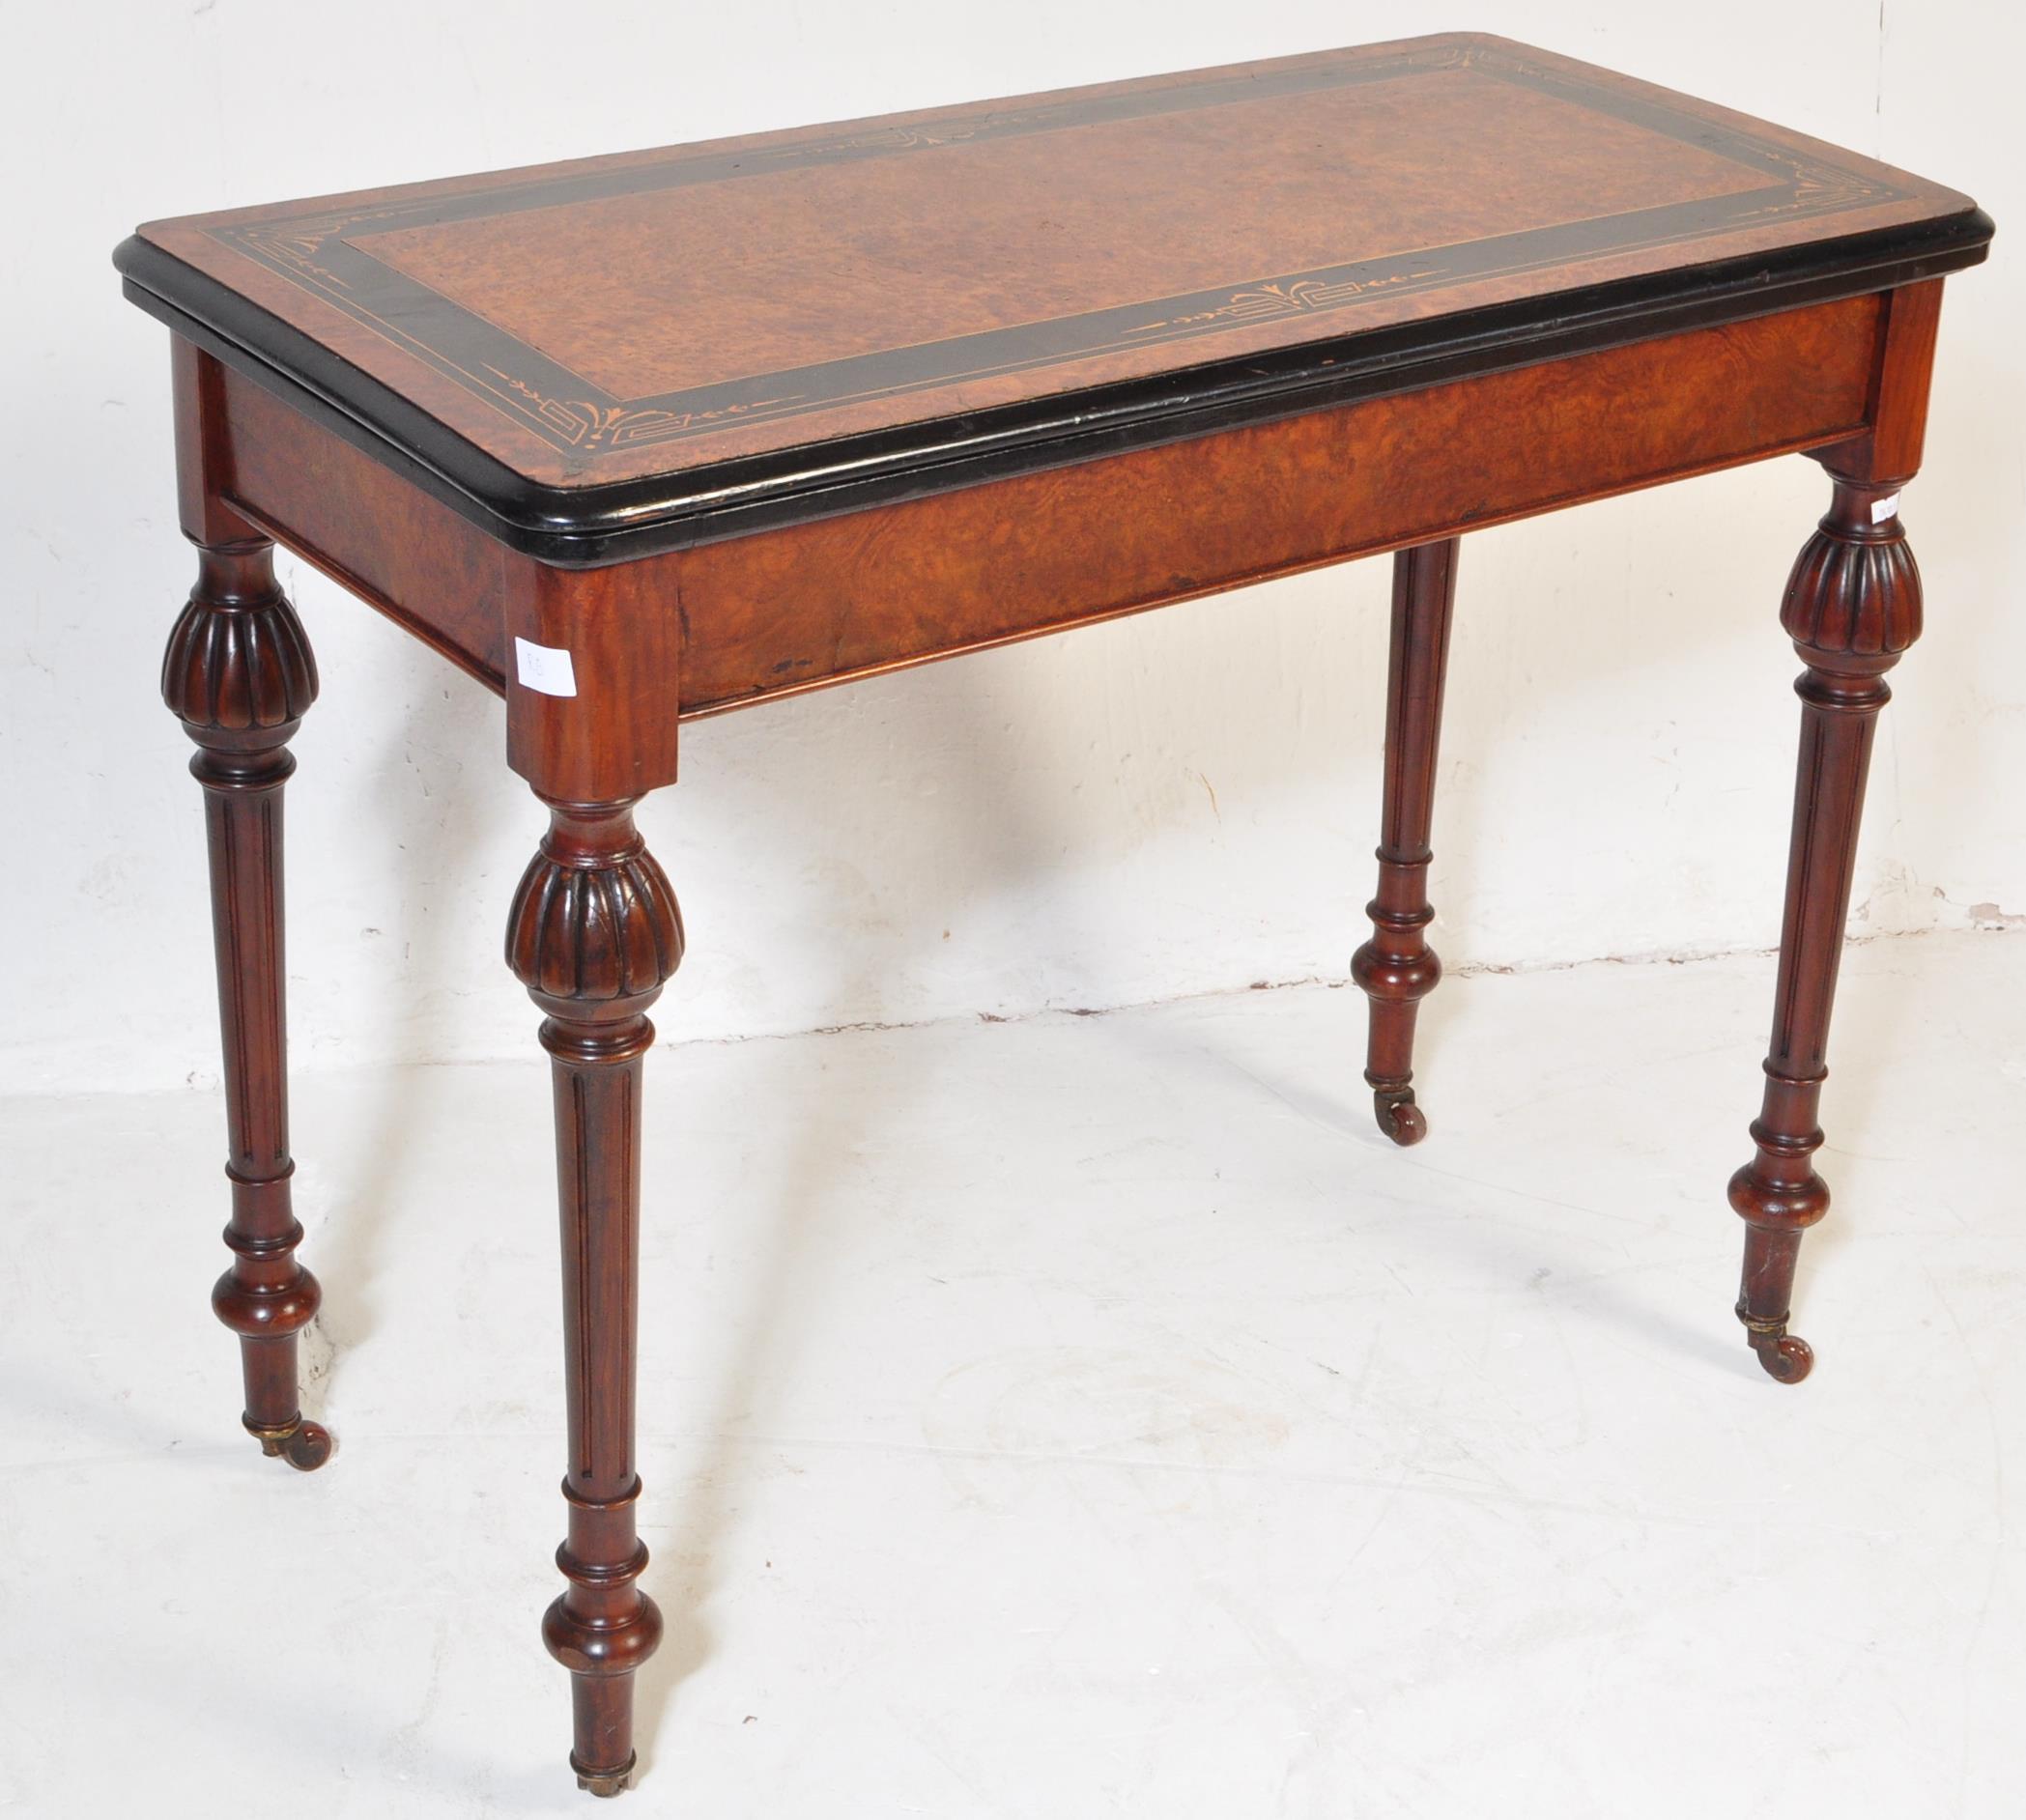 19TH CENTURY AMBOYNA AESTHETIC MOVEMENT CARD TABLE - Image 2 of 5